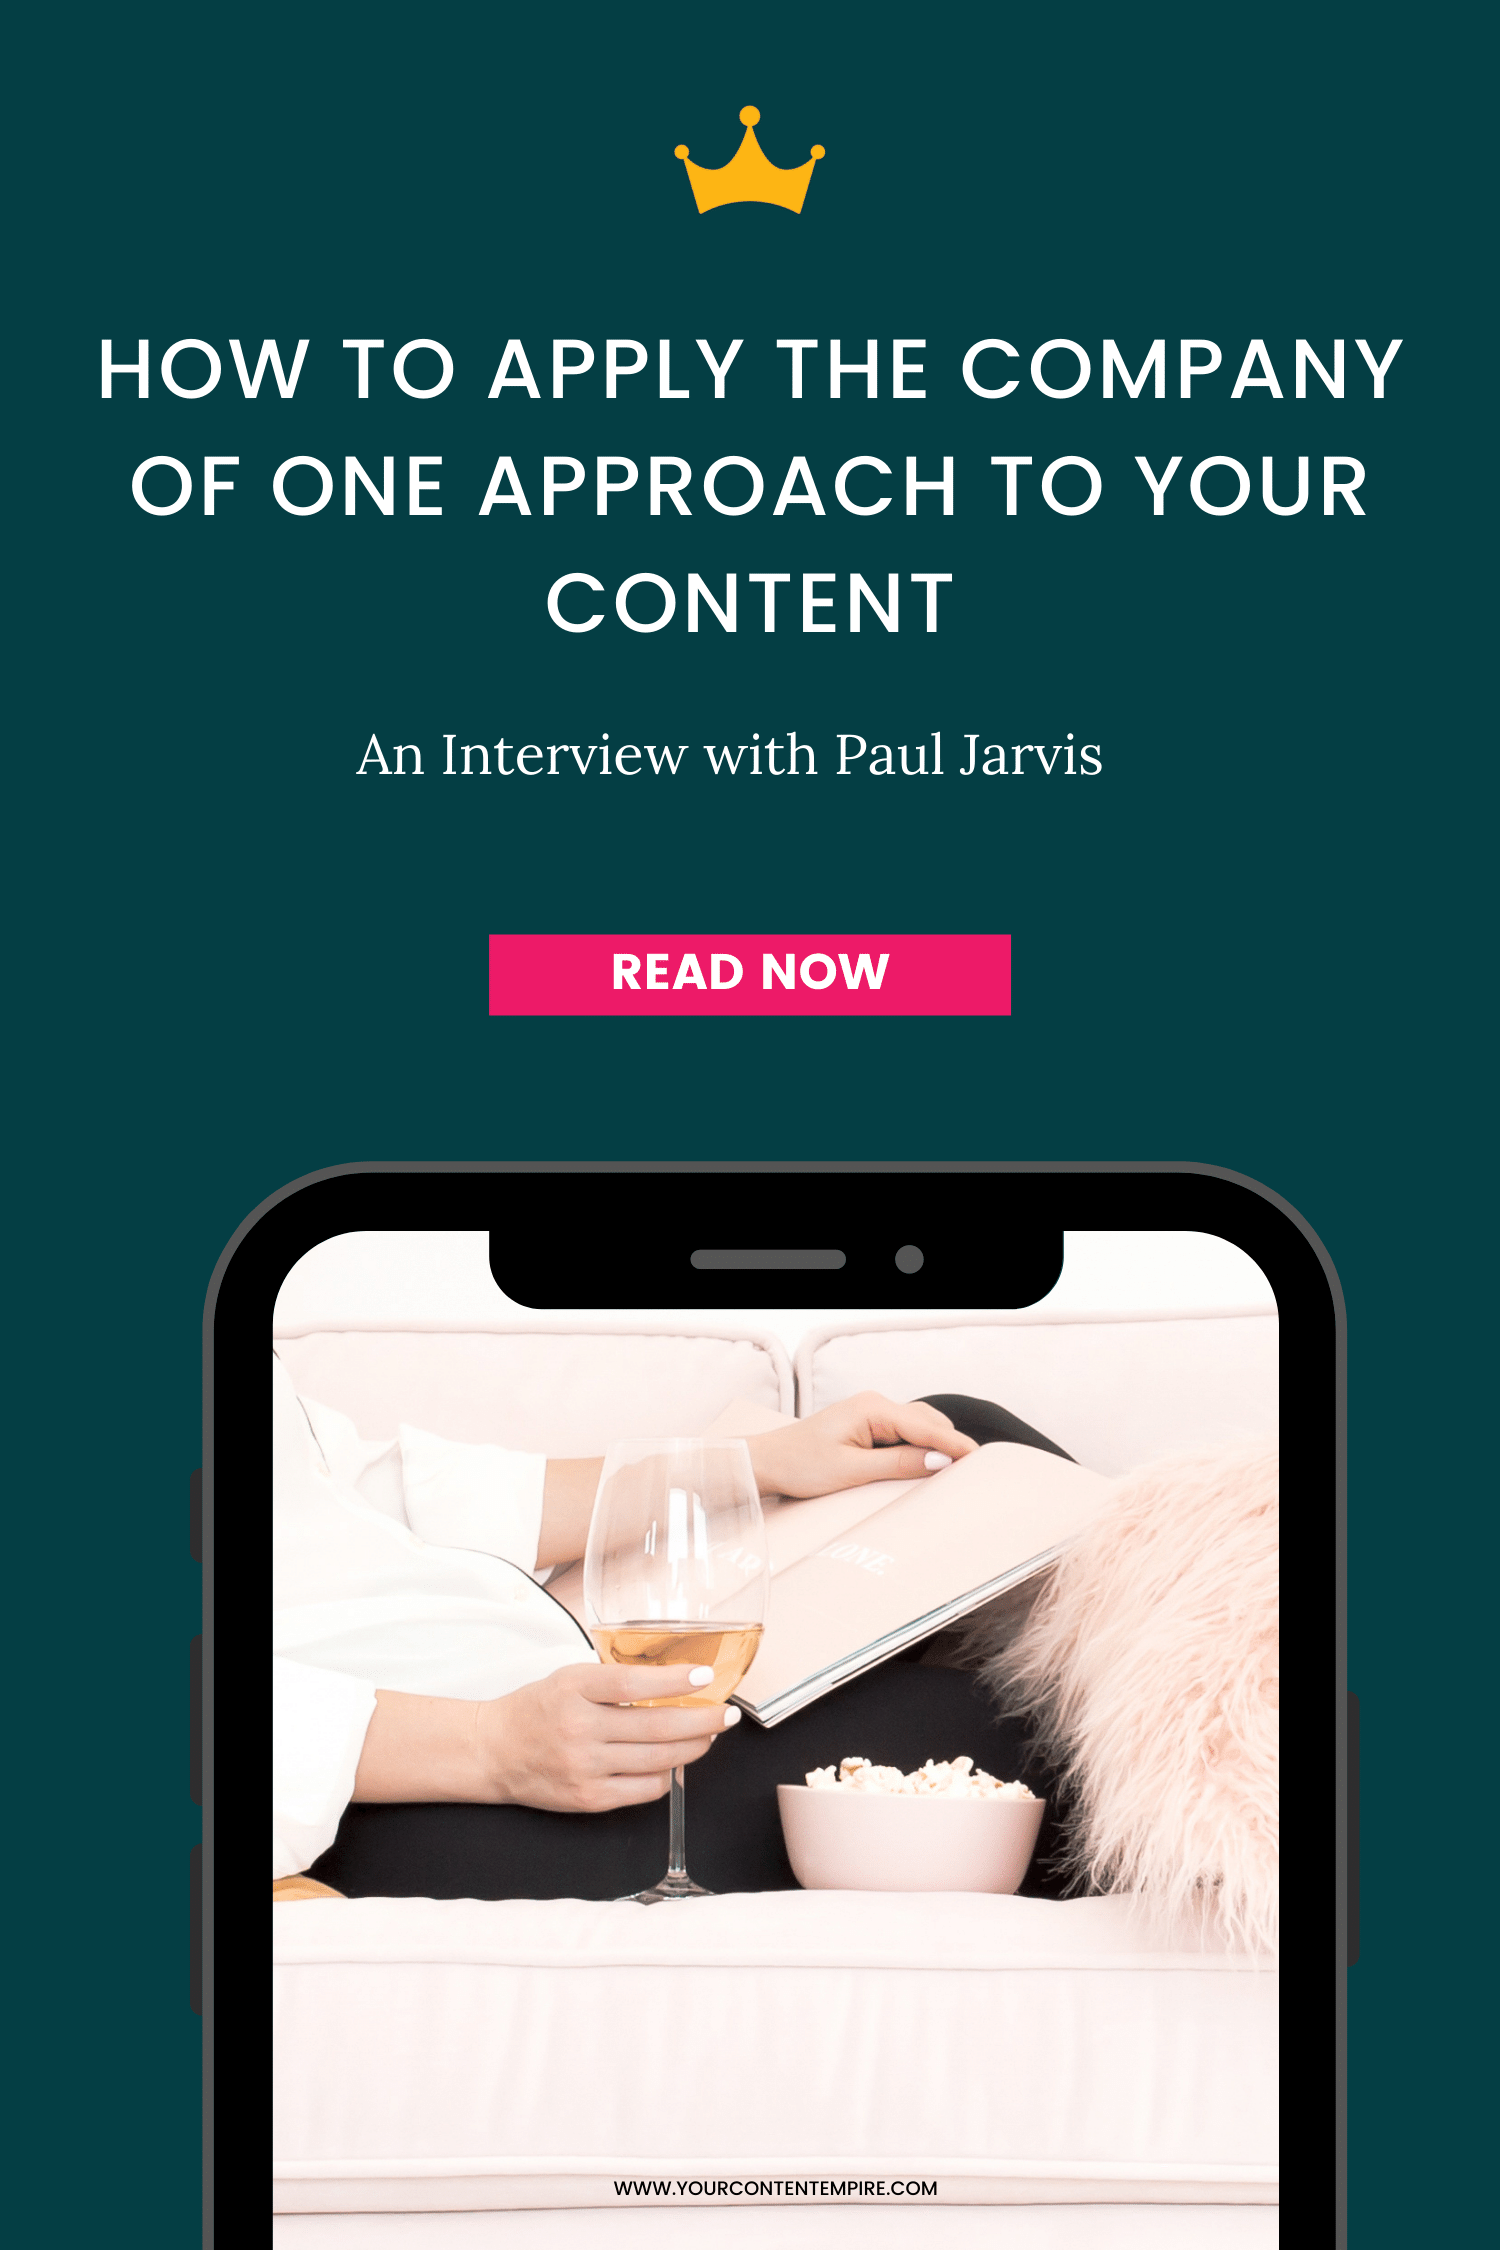 How to Apply the Company of One Approach to Your Content